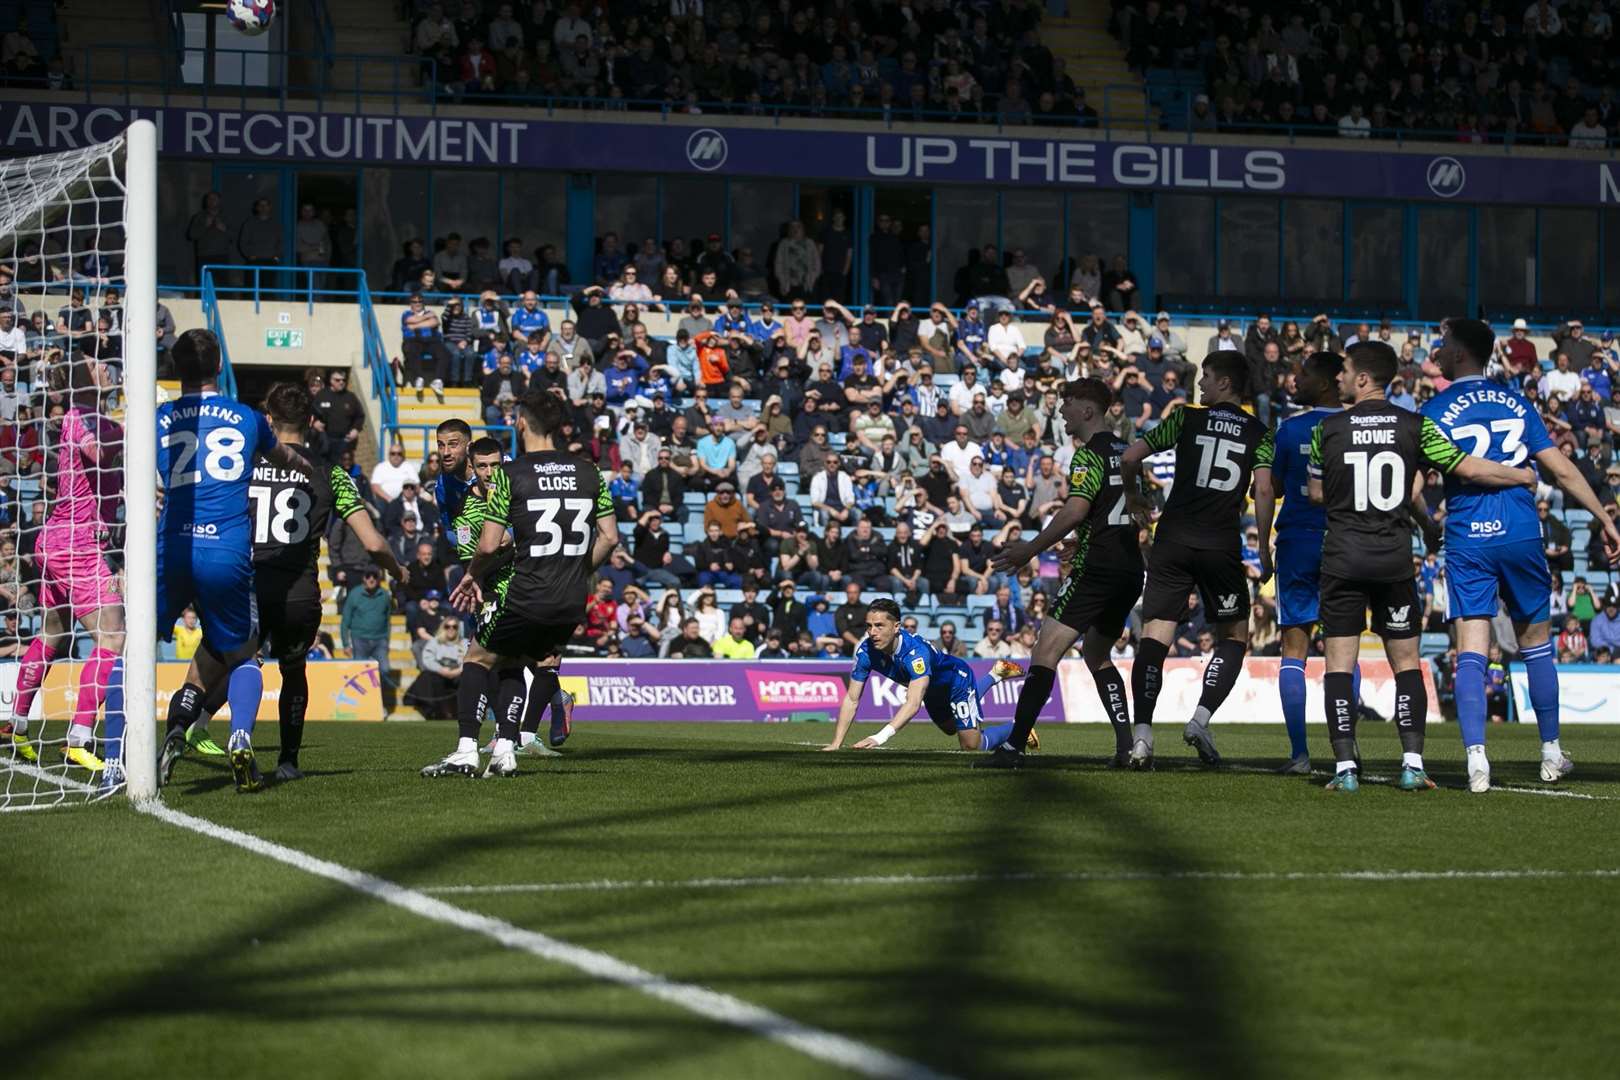 Tom Nichols' volley hits the back of the net for Gillingham against Doncaster